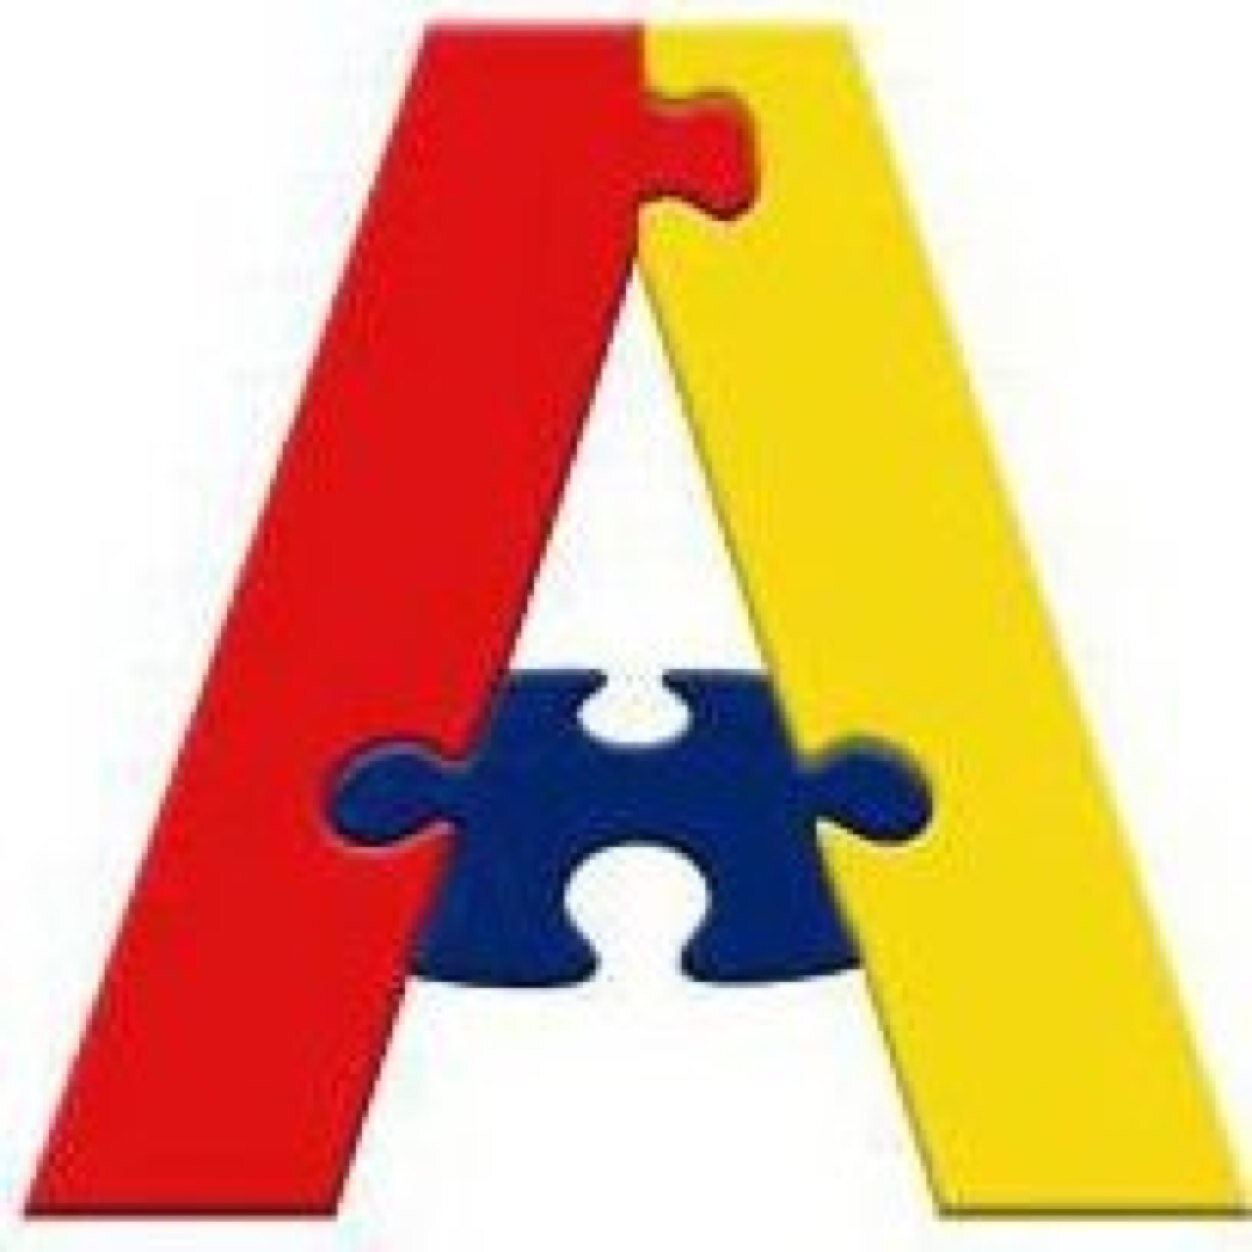 Autism Unites Us is a 501c3 non-profit organization established in 2011 by parents of children with Autism in Northwest Bergen County, NJ.